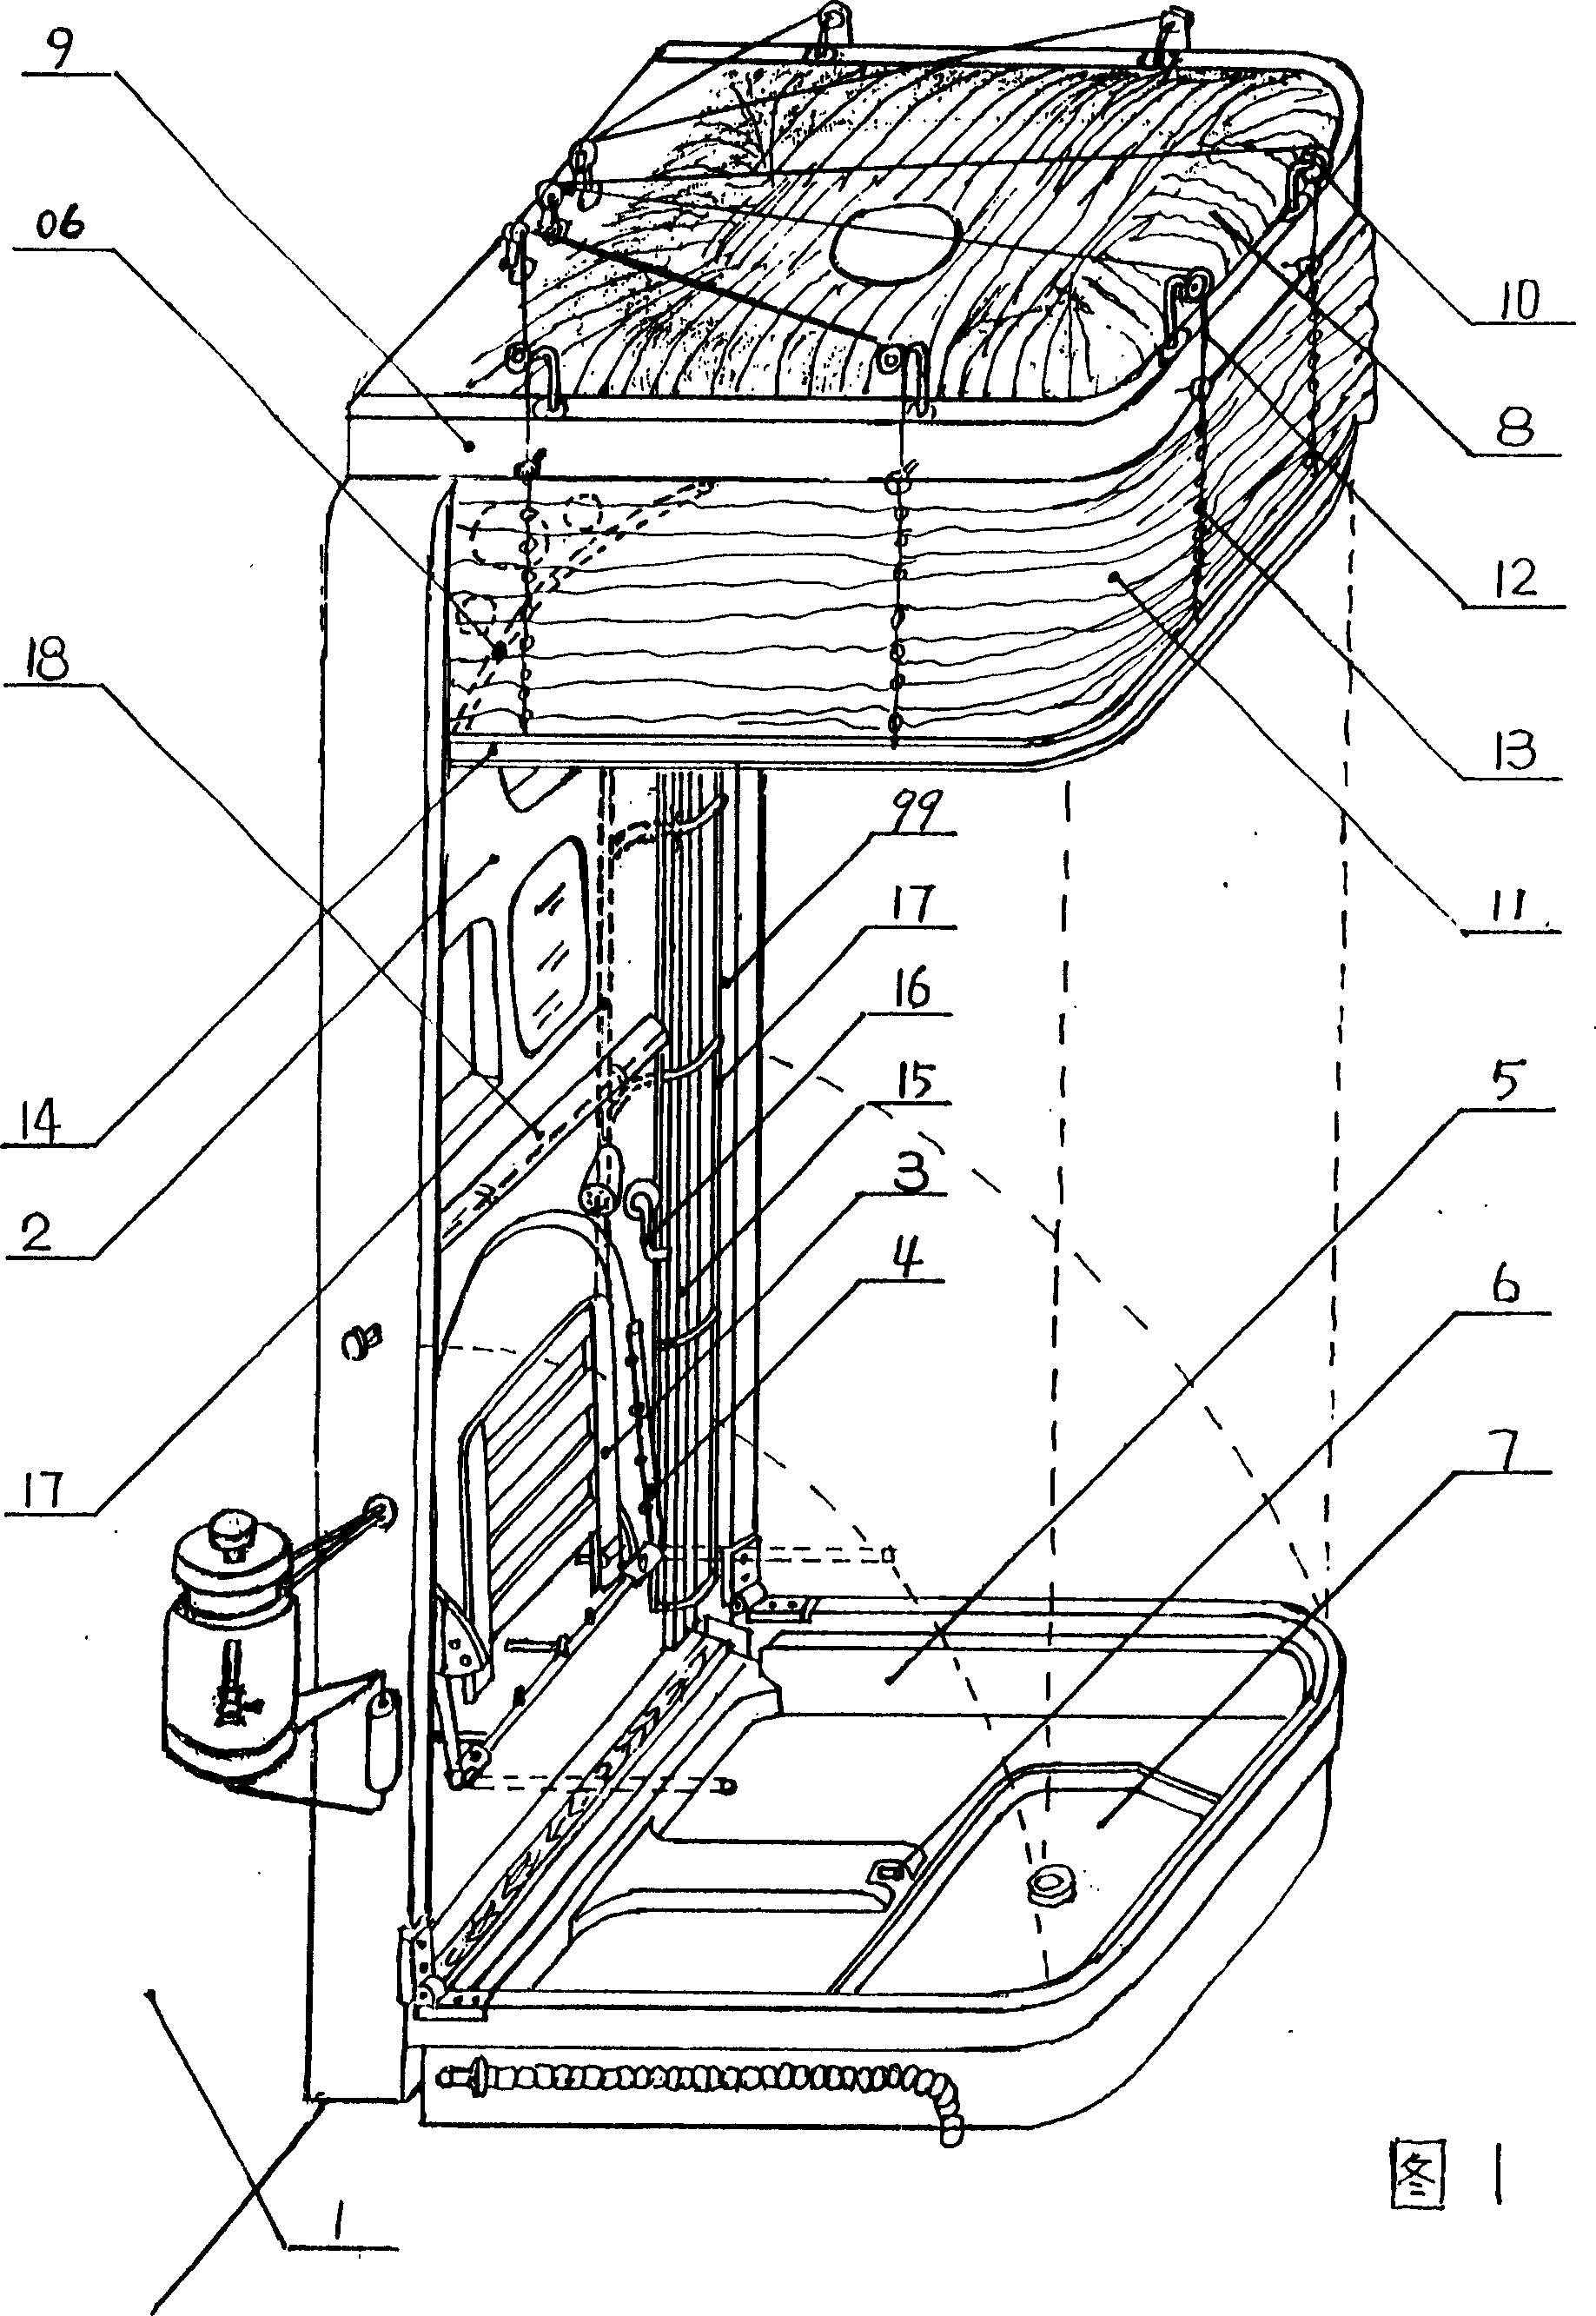 Hanging-panel bell-type steaming-shower device